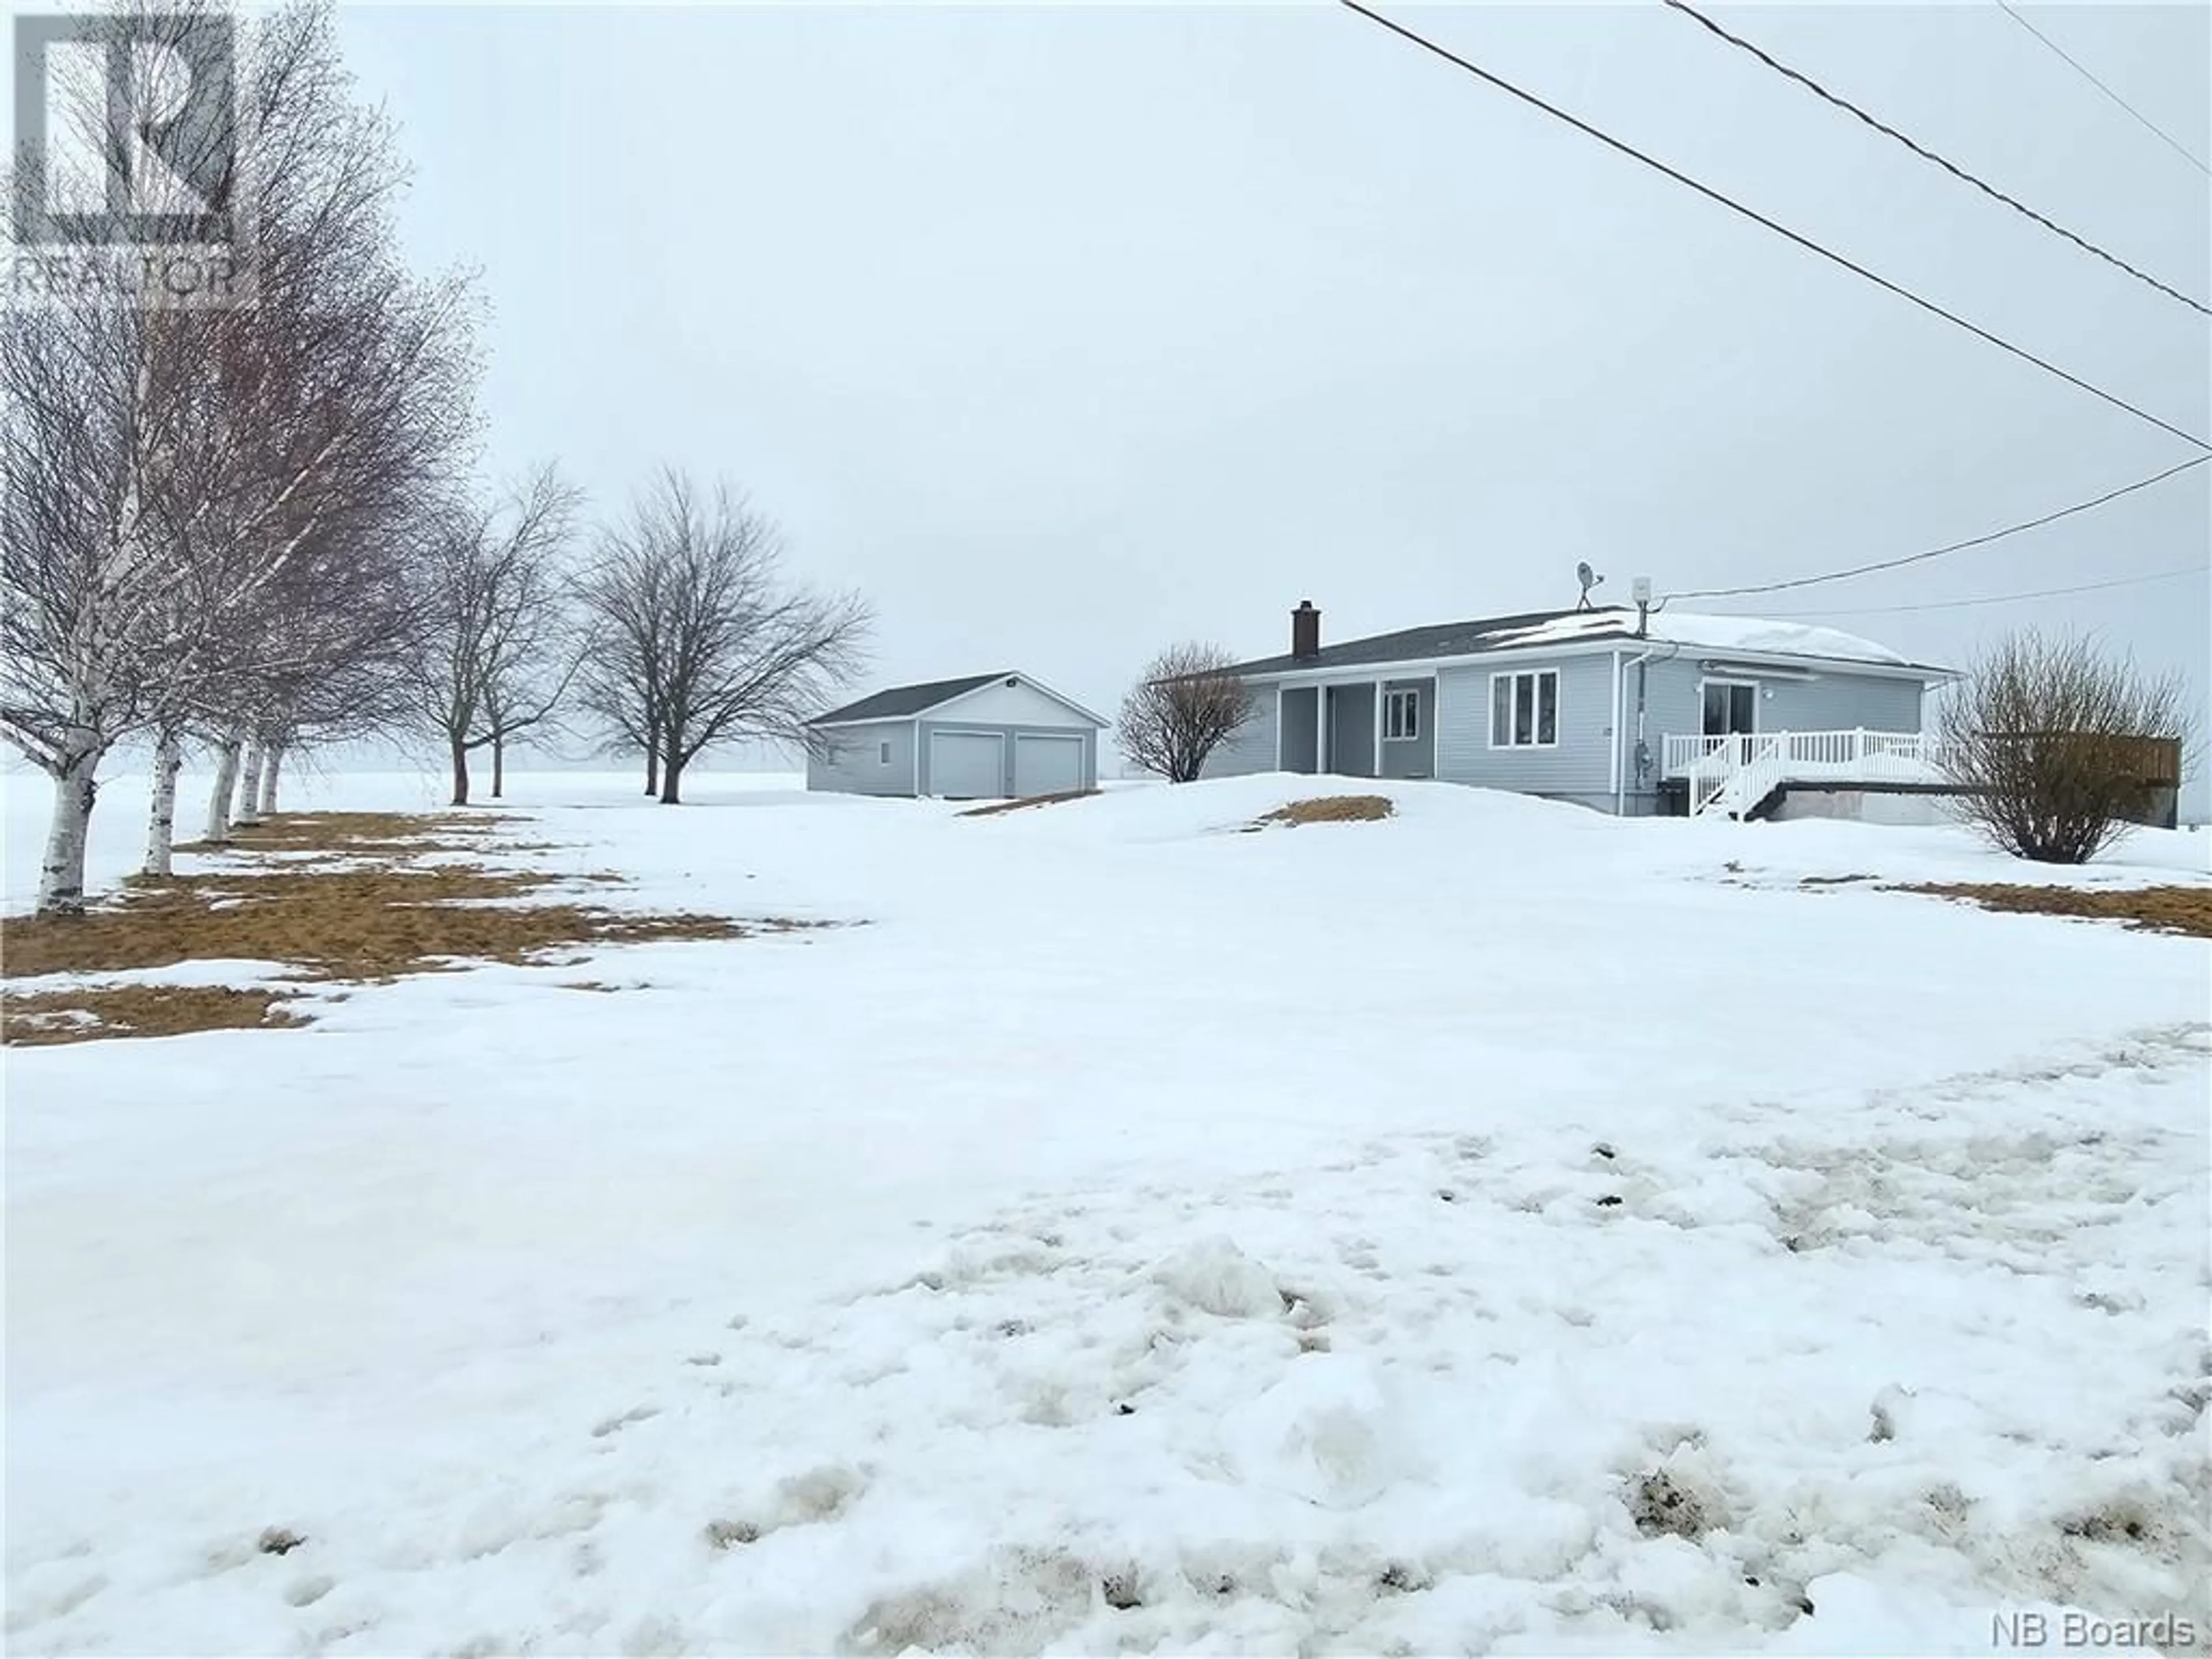 Street view for 86 Bards Road, DSL de Drummond/DSL of Drummond New Brunswick E3Y2A7